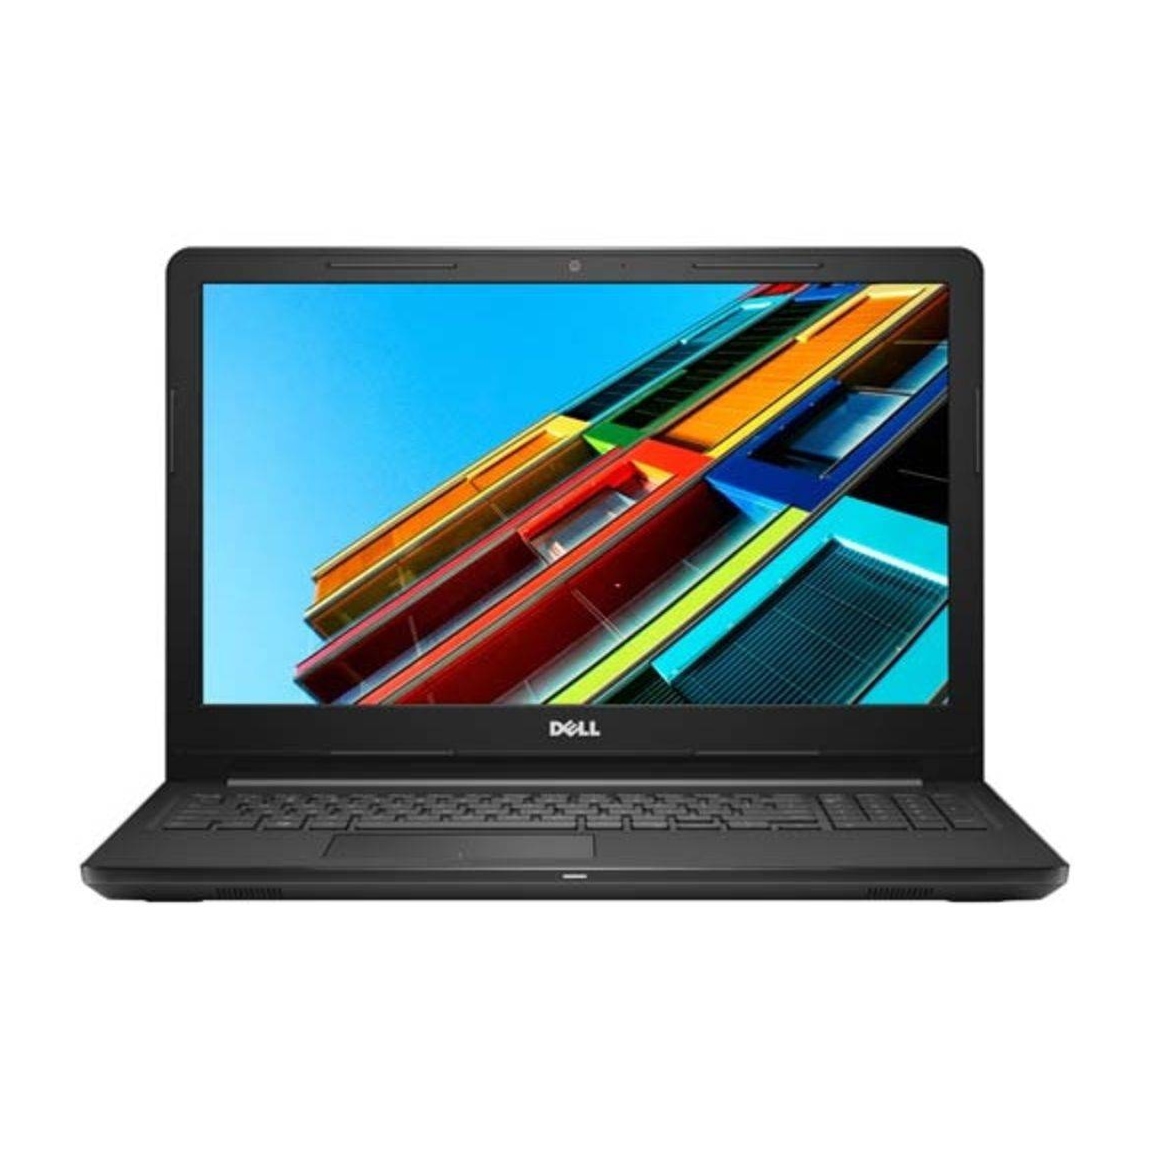 Notebook Dell Inspiron 3000 - I15-3576-A70C